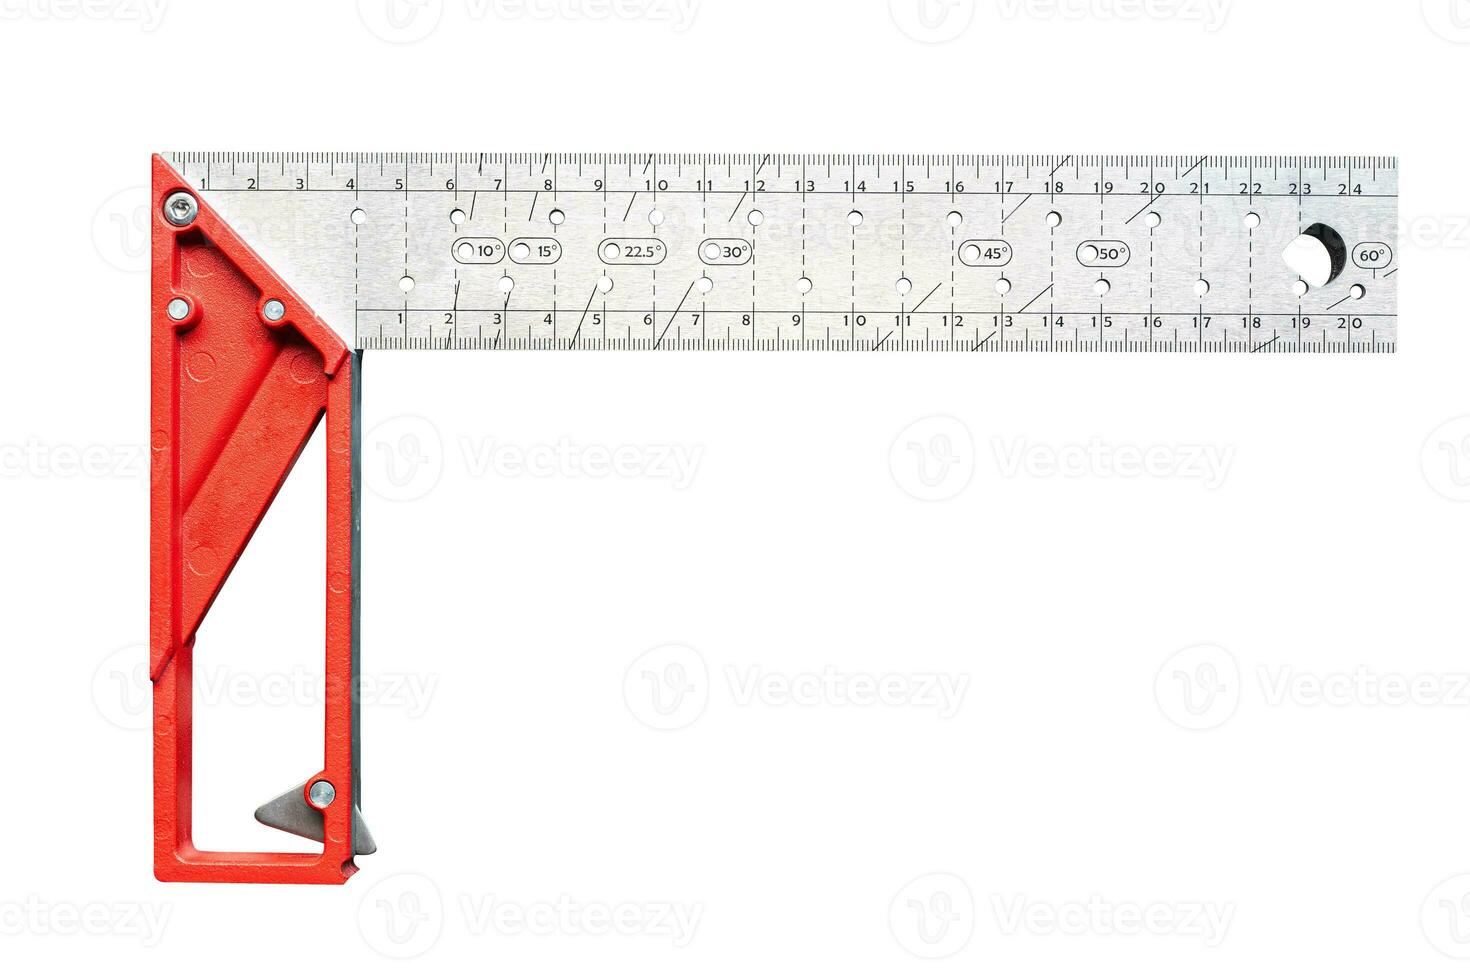 L square or  L shaped squares measuring hand tools for marking and referencing a 90  angle  isolated on white background photo